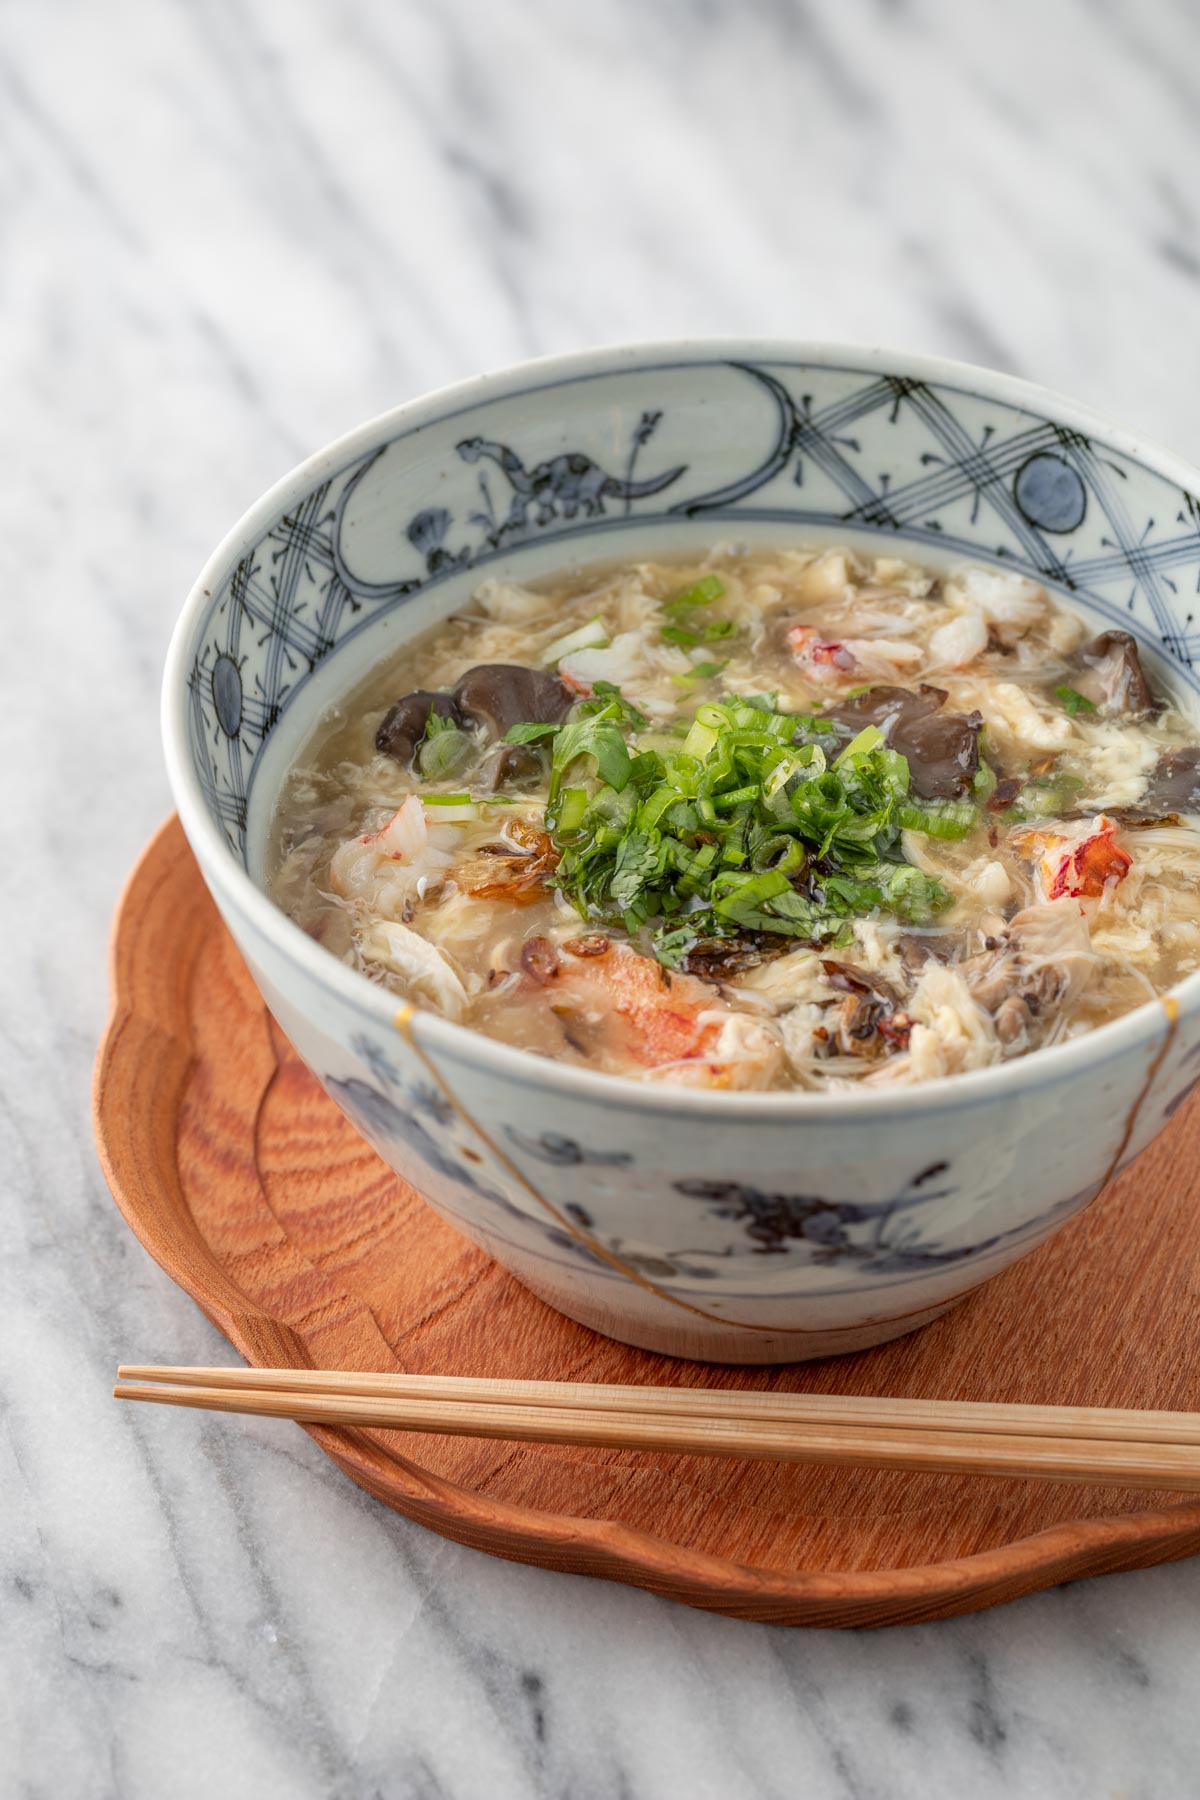 egg drop crab soup with mushroom in a soup bowl with chopsticks and wooden tray